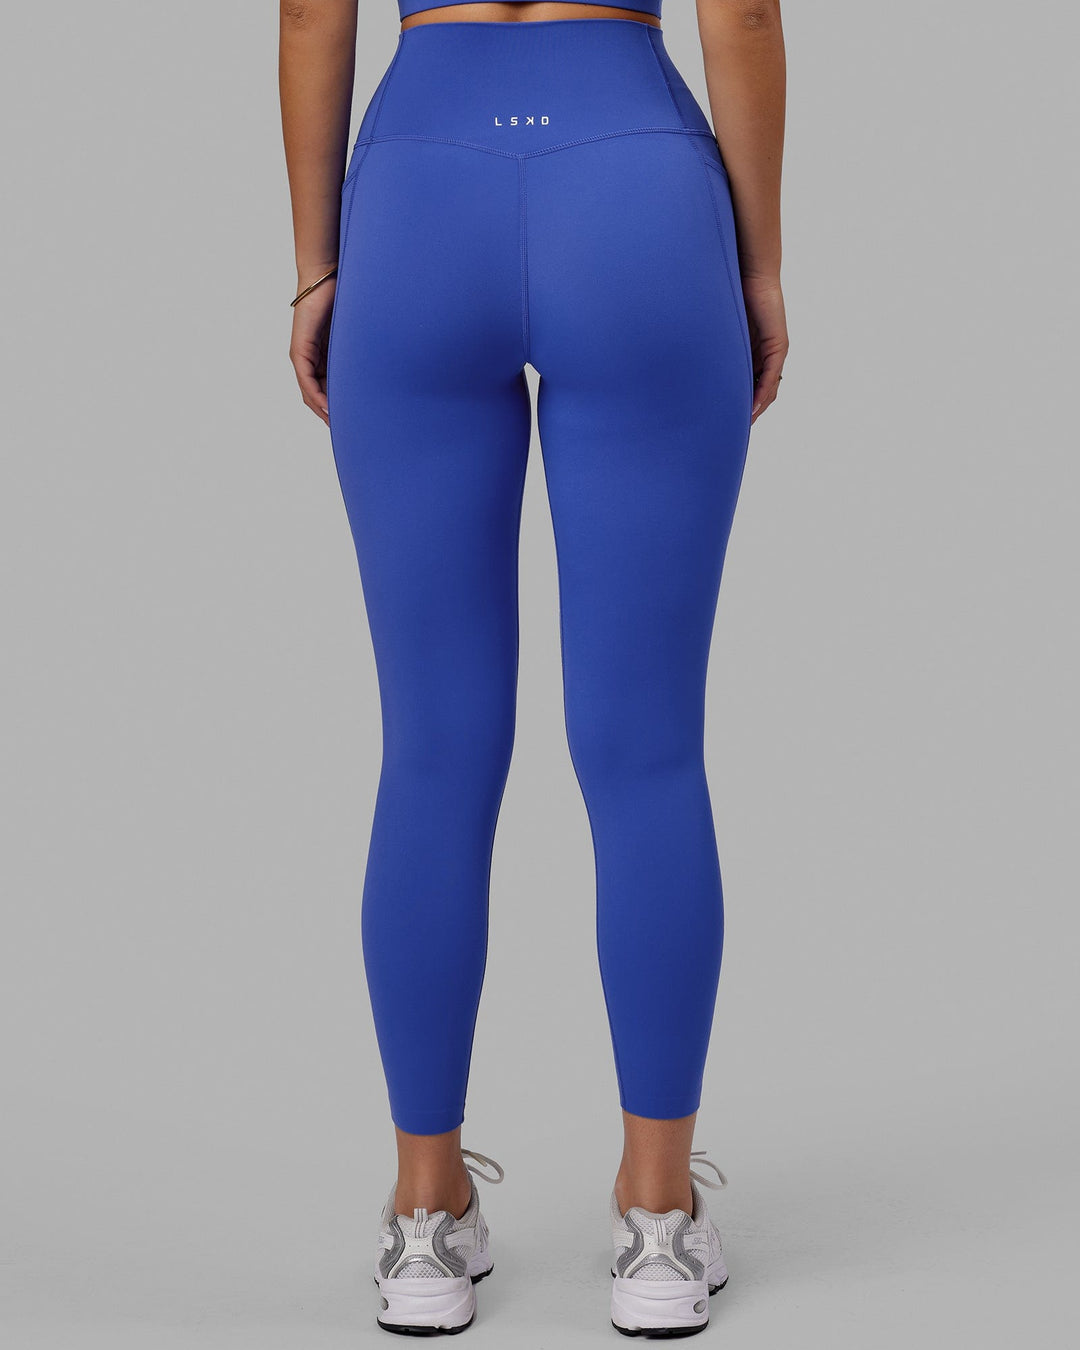 Elixir 7/8 Length Tights With Pockets - Power Cobalt